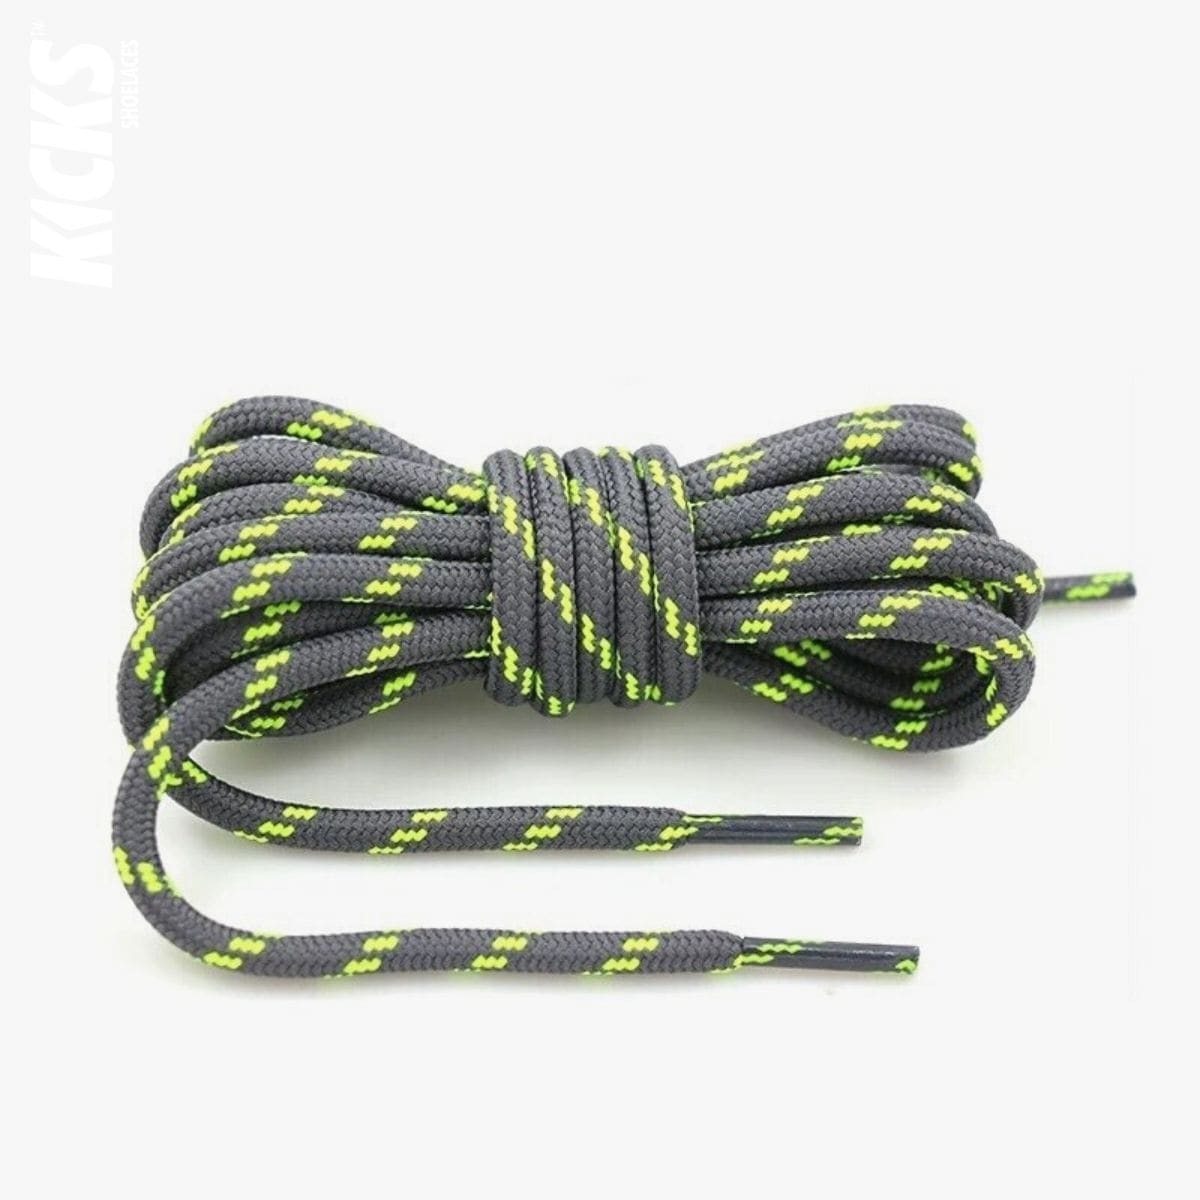 trekking-shoe-laces-united-states-in-dark-grey-and-green-shop-online